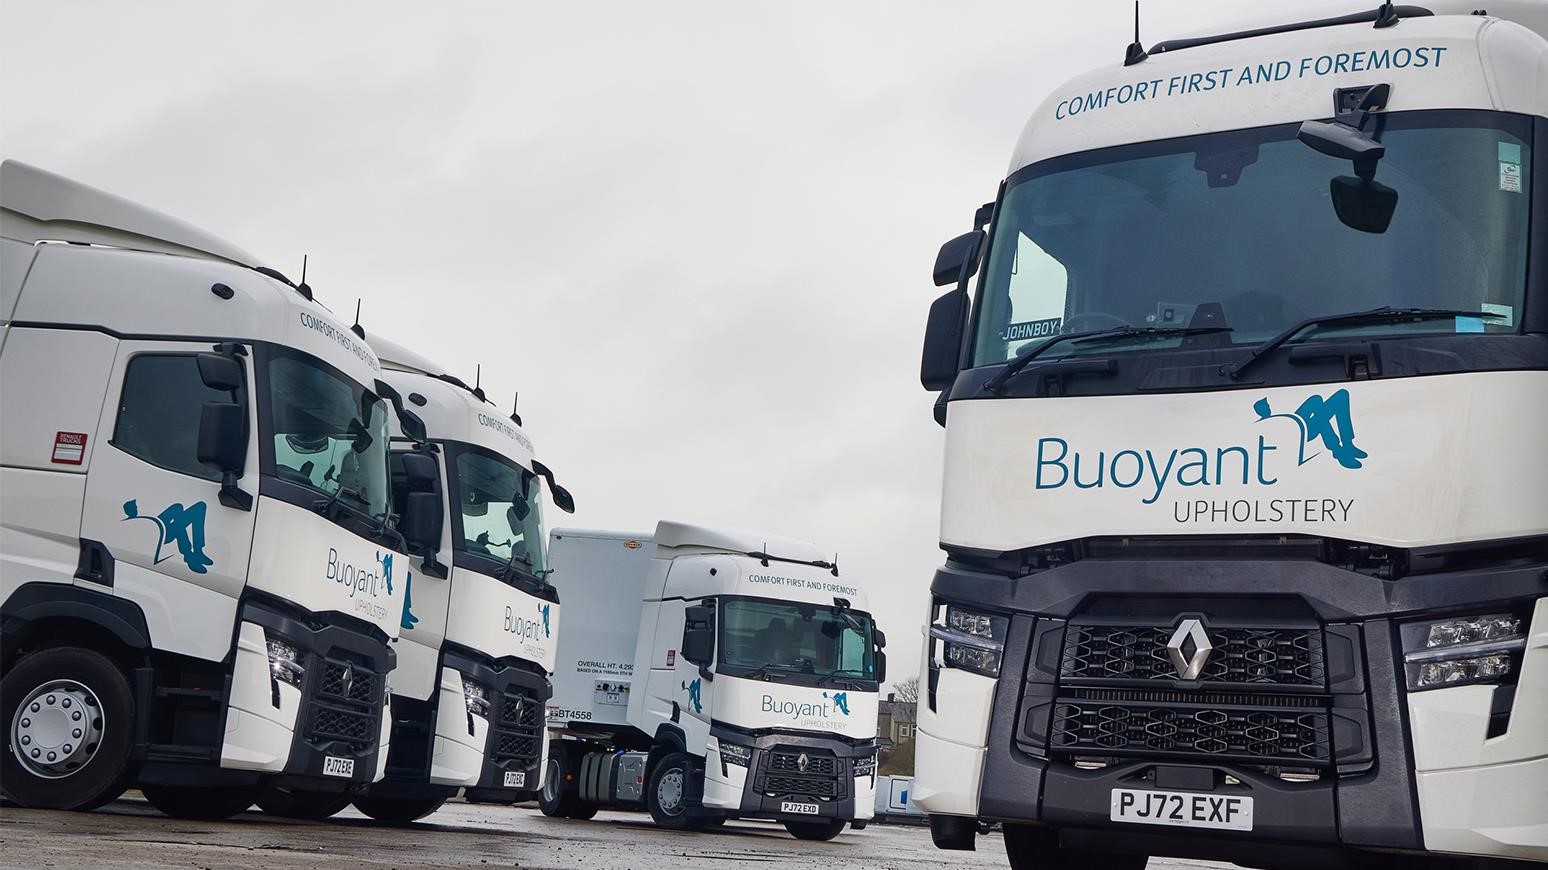 Upholstered Furniture Manufacturer Updates Delivery Fleet With 4 New Renault T440 Tractor Units